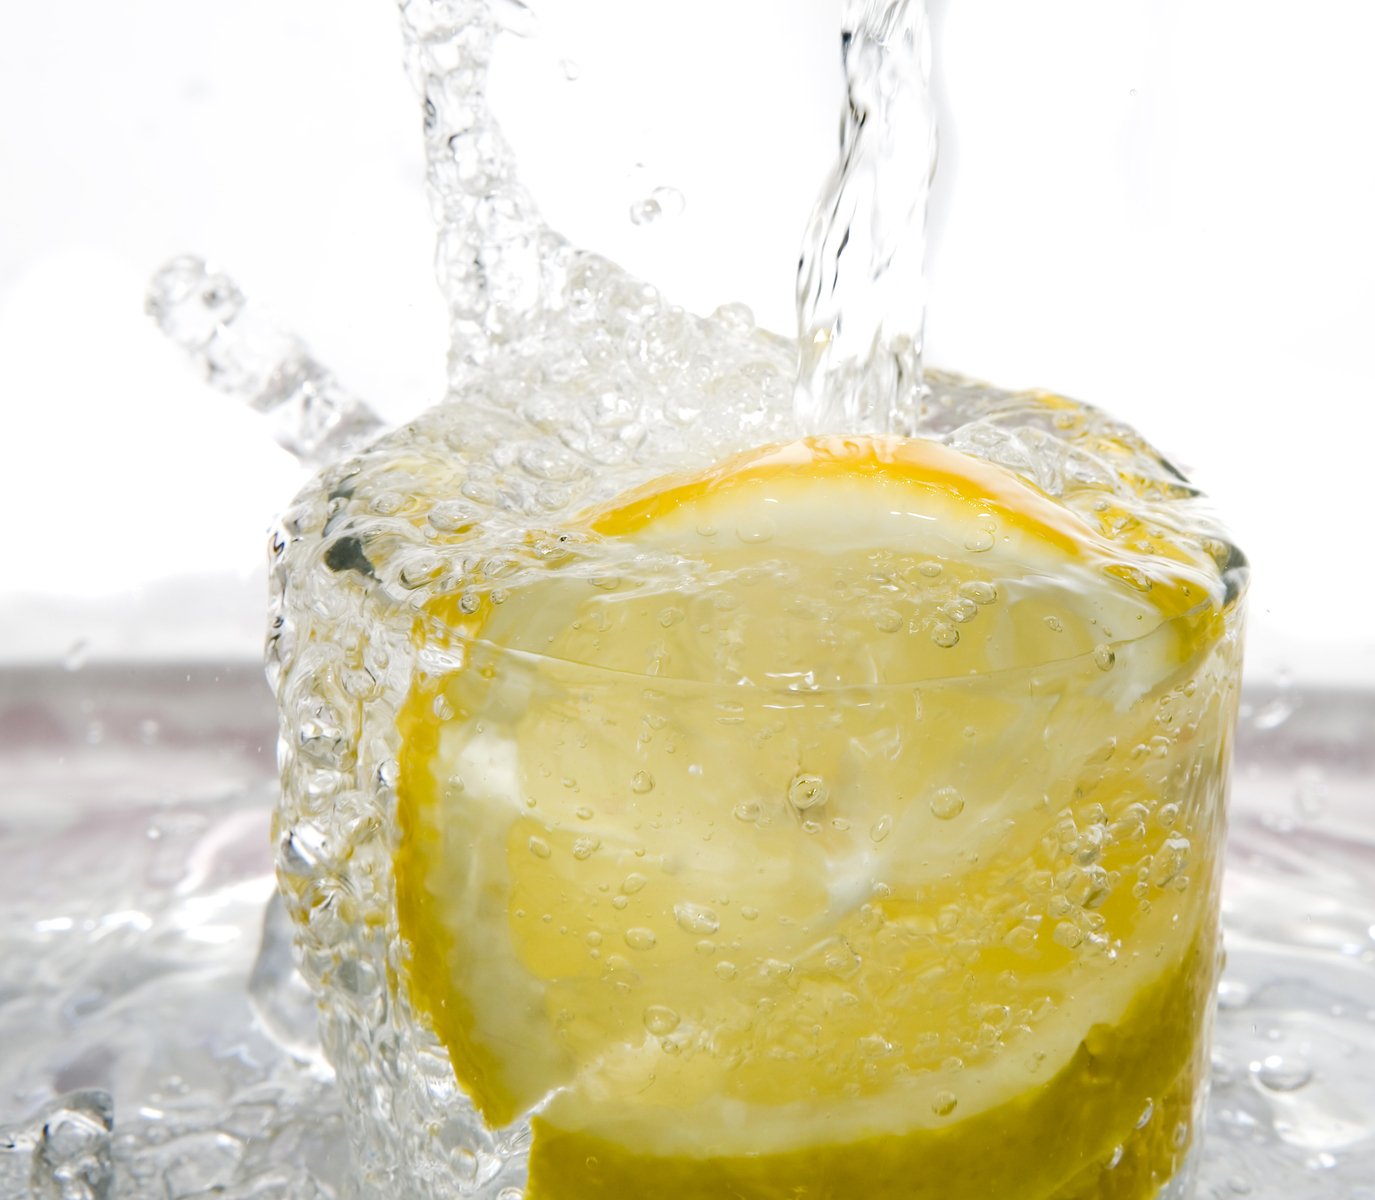 a large lemon under water with bubbles and light